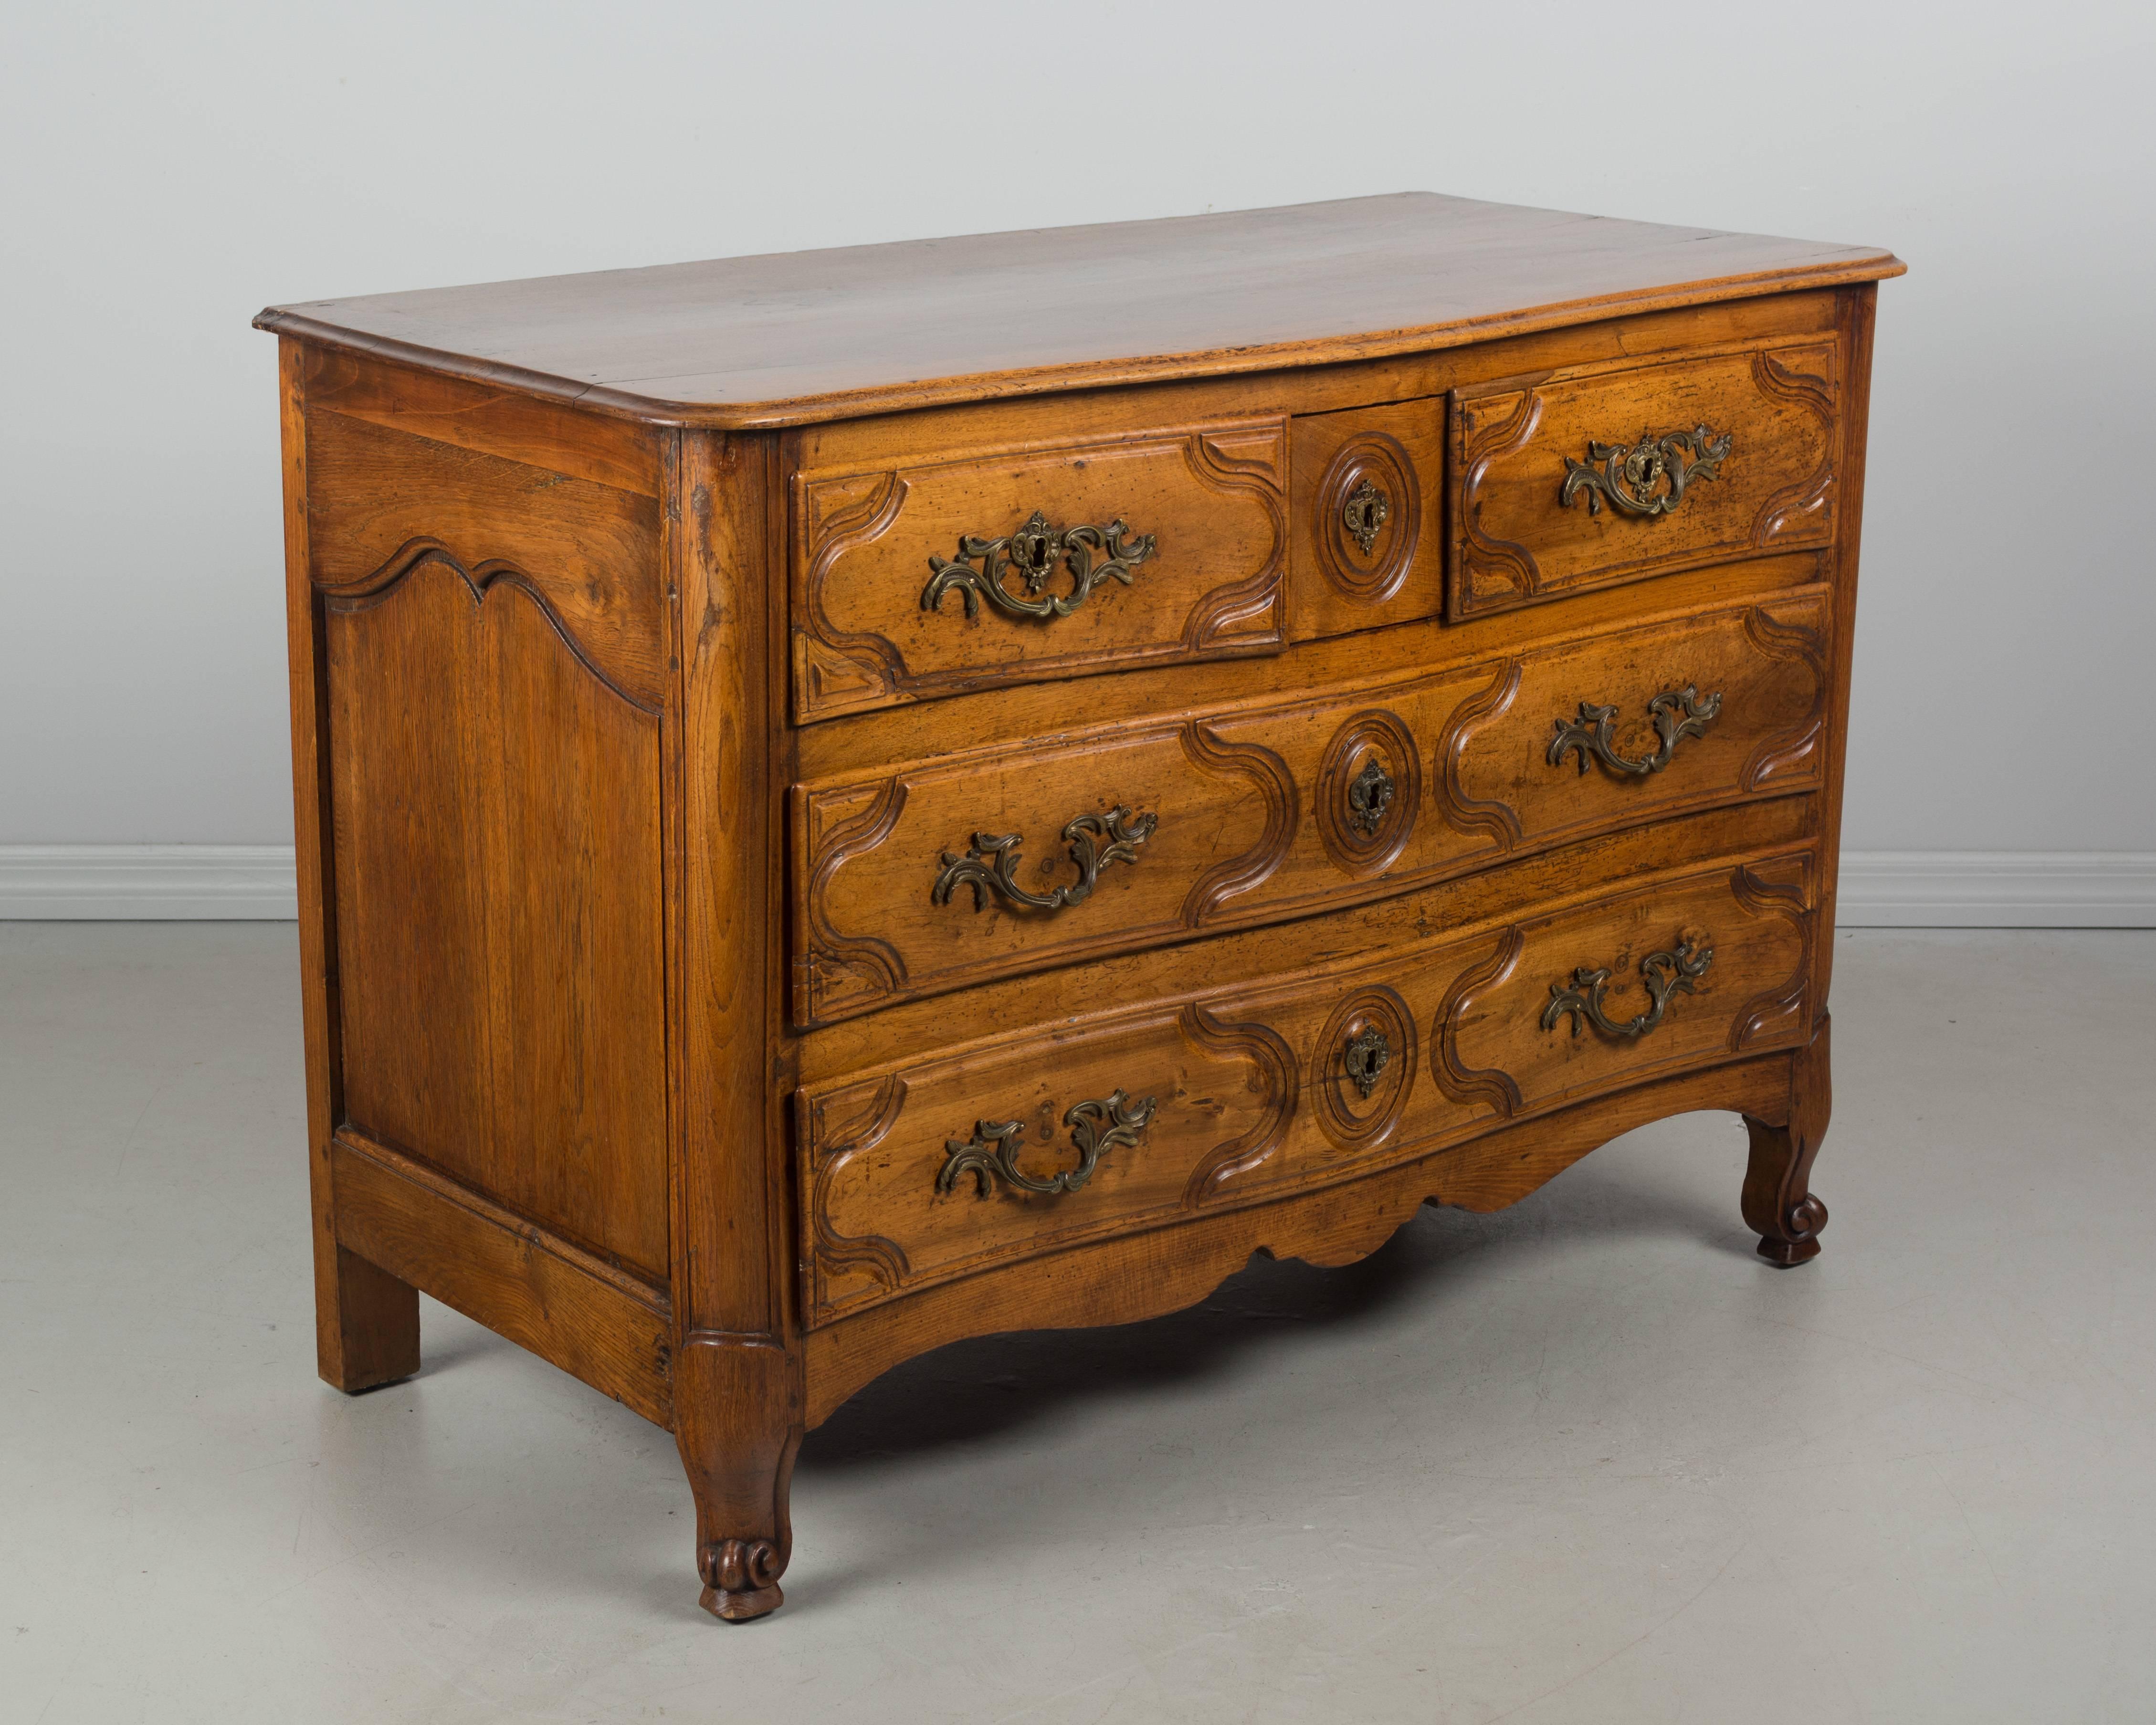 A 19th century French Louis XV style serpentine front commode, or chest of drawers, from Paris. The top and front are made of solid walnut and the sides are made of oak. Dovetailed drawers with hand-carved decoration and brass hardware. Waxed